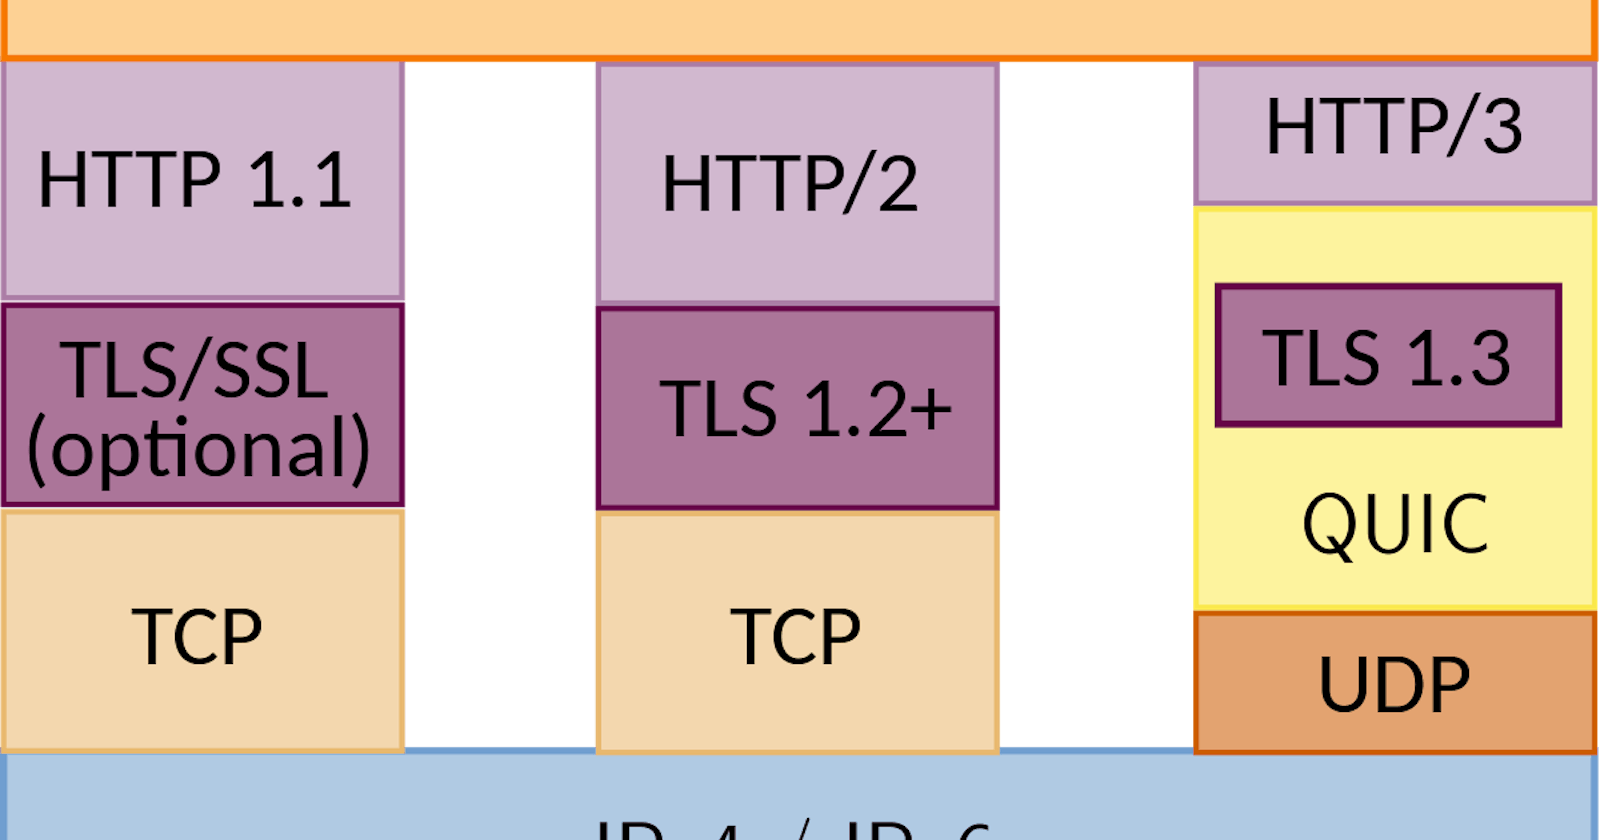 HTTP/3 support for URLSession